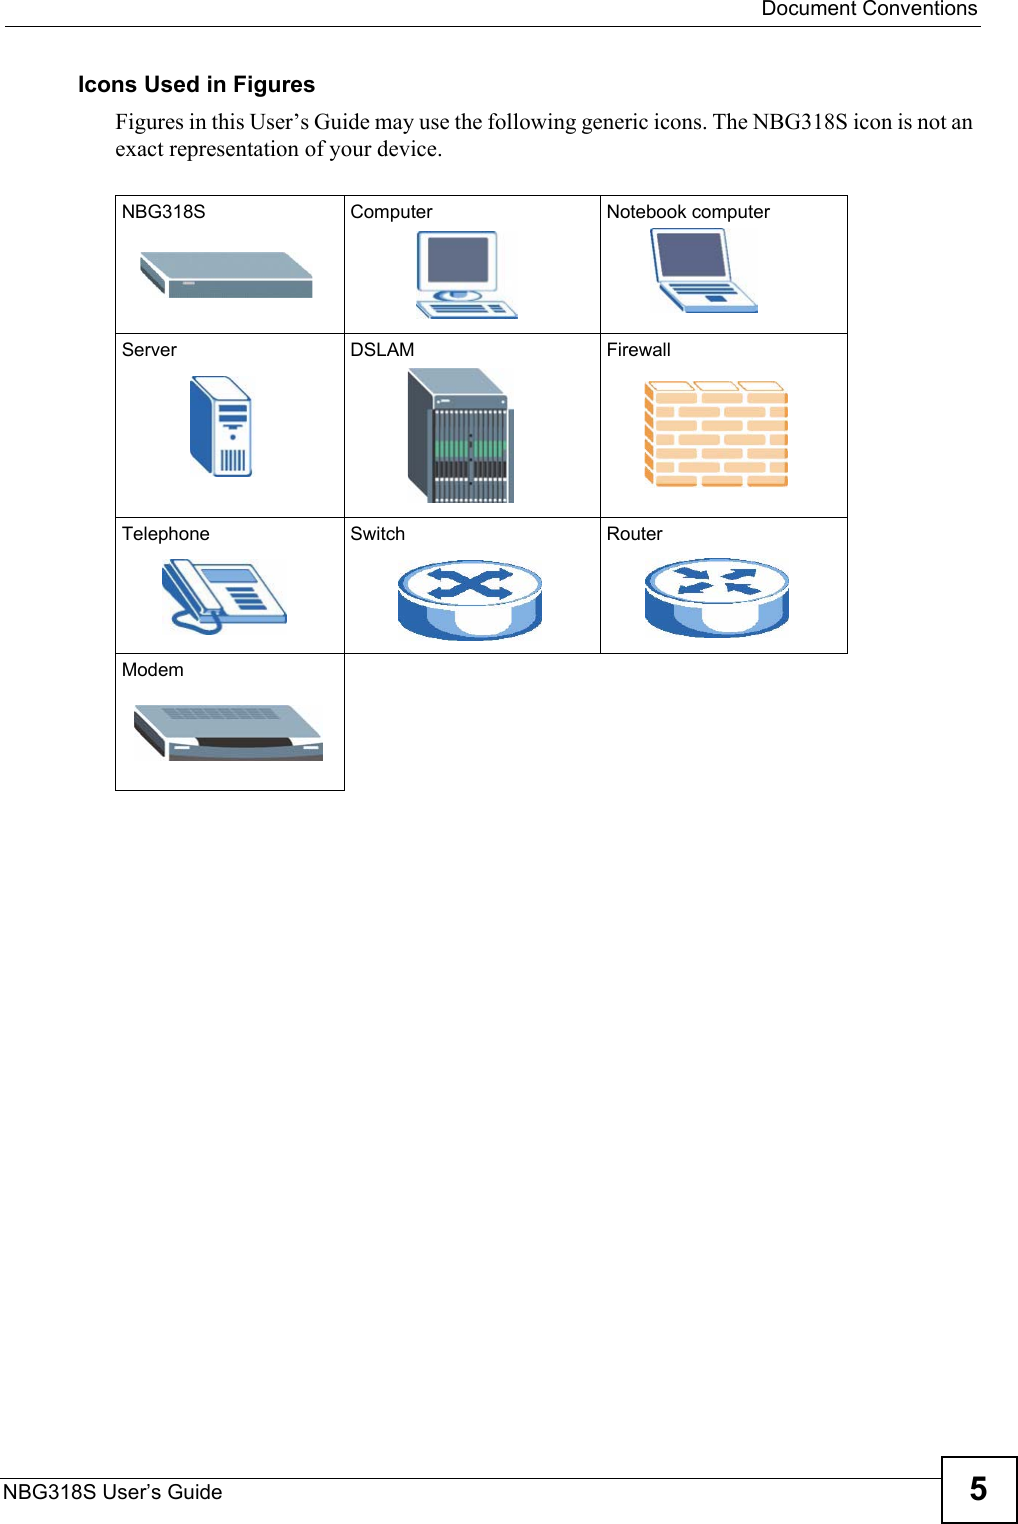  Document ConventionsNBG318S User’s Guide 5Icons Used in FiguresFigures in this User’s Guide may use the following generic icons. The NBG318S icon is not an exact representation of your device.NBG318S Computer Notebook computerServer DSLAM FirewallTelephone Switch RouterModem